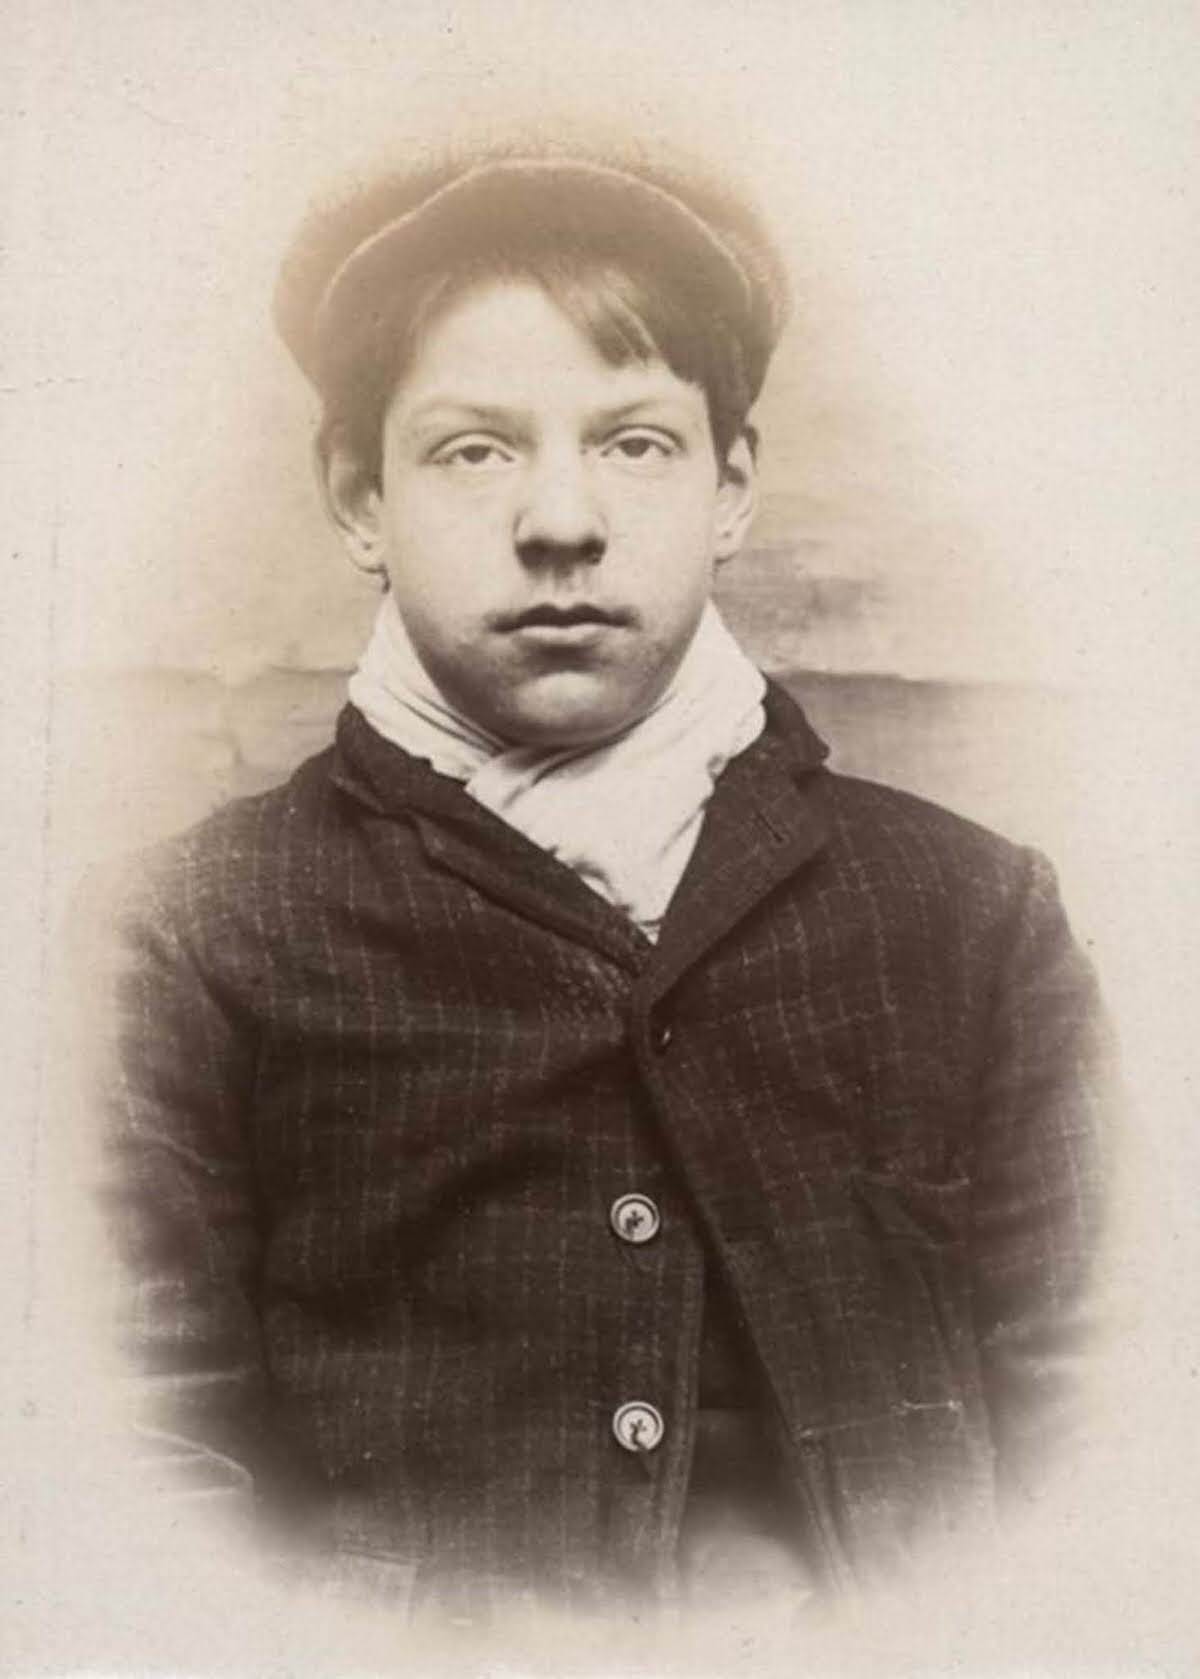 Sidney Forrest, 17, arrested for stealing a pair of reins and two whips, 1908.